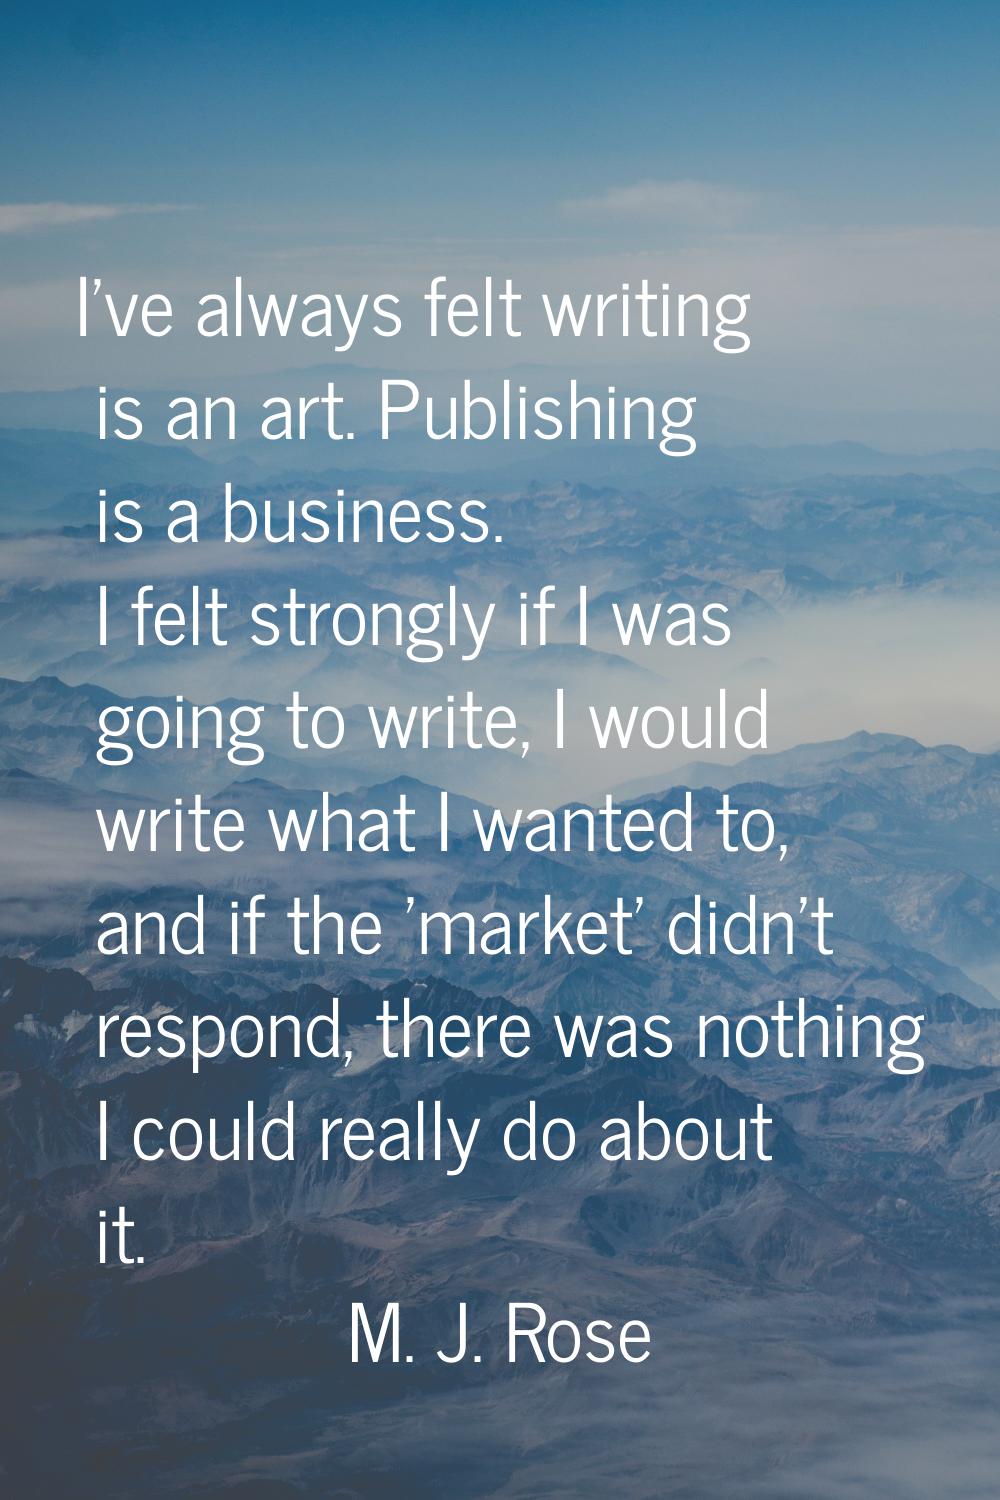 I've always felt writing is an art. Publishing is a business. I felt strongly if I was going to wri